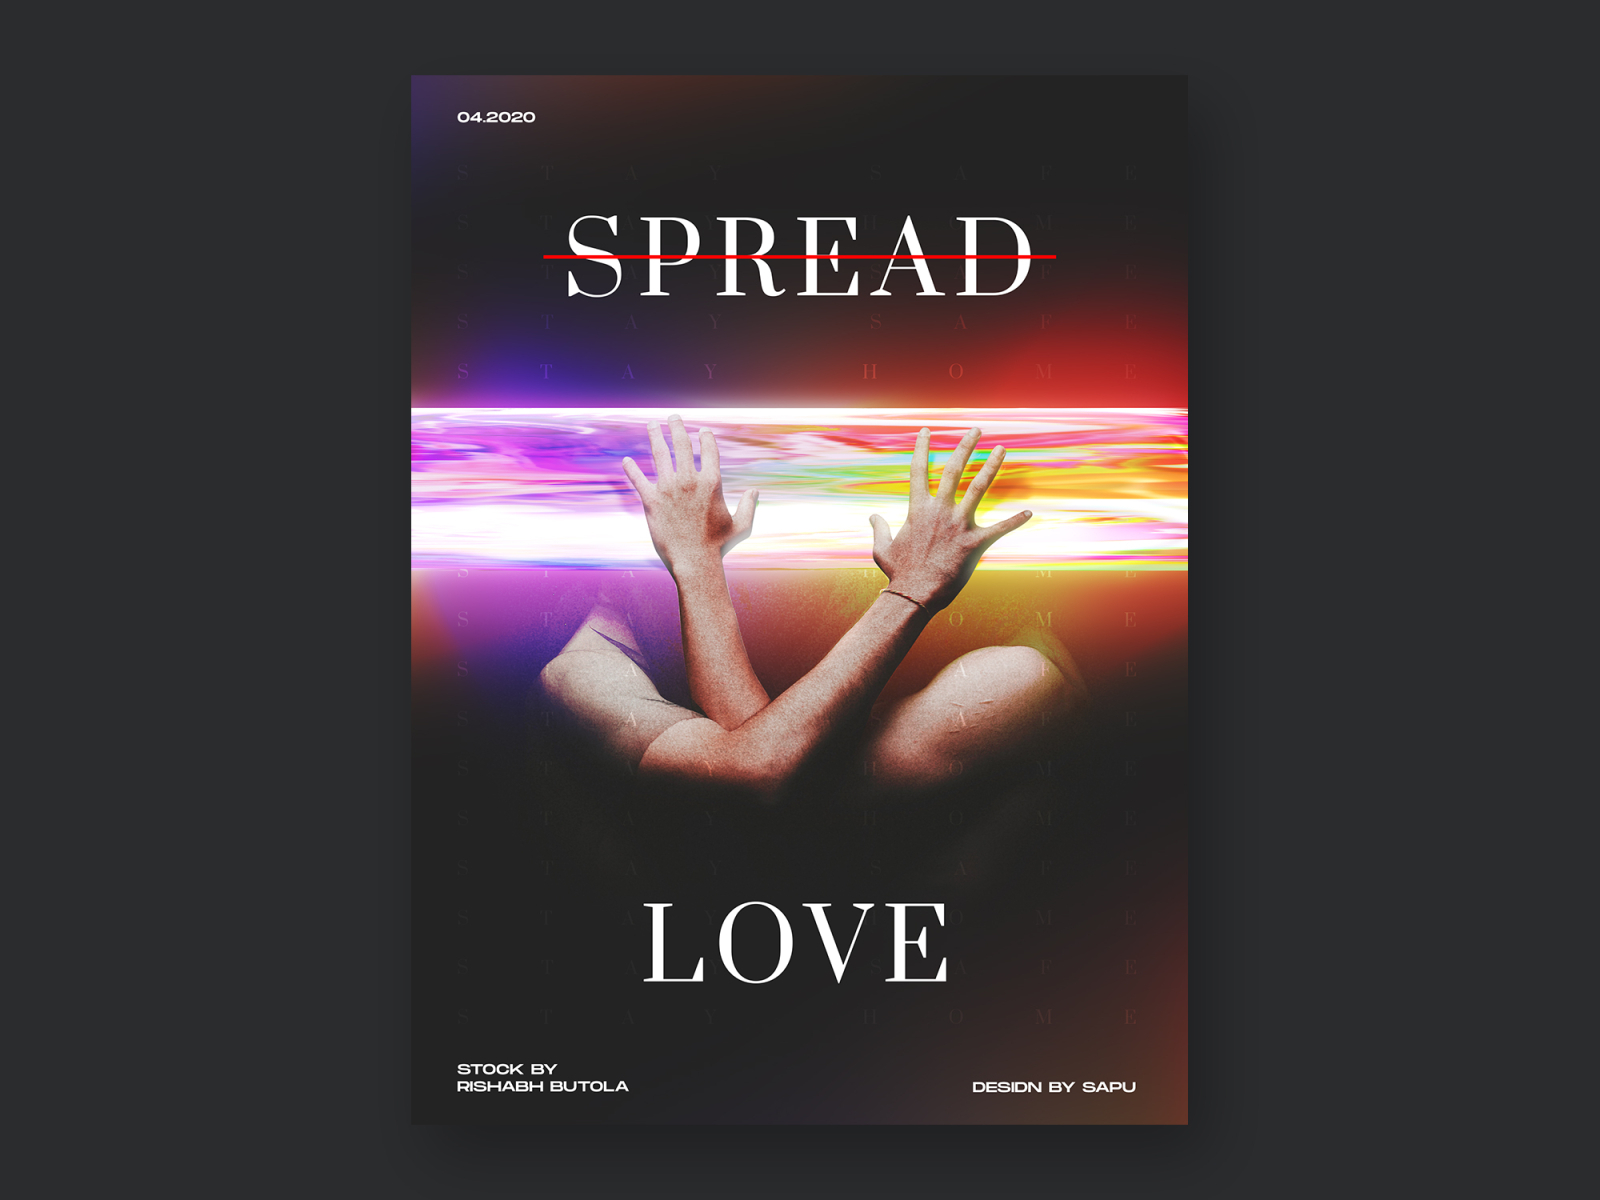 Don't Spread Love by Sapu on Dribbble